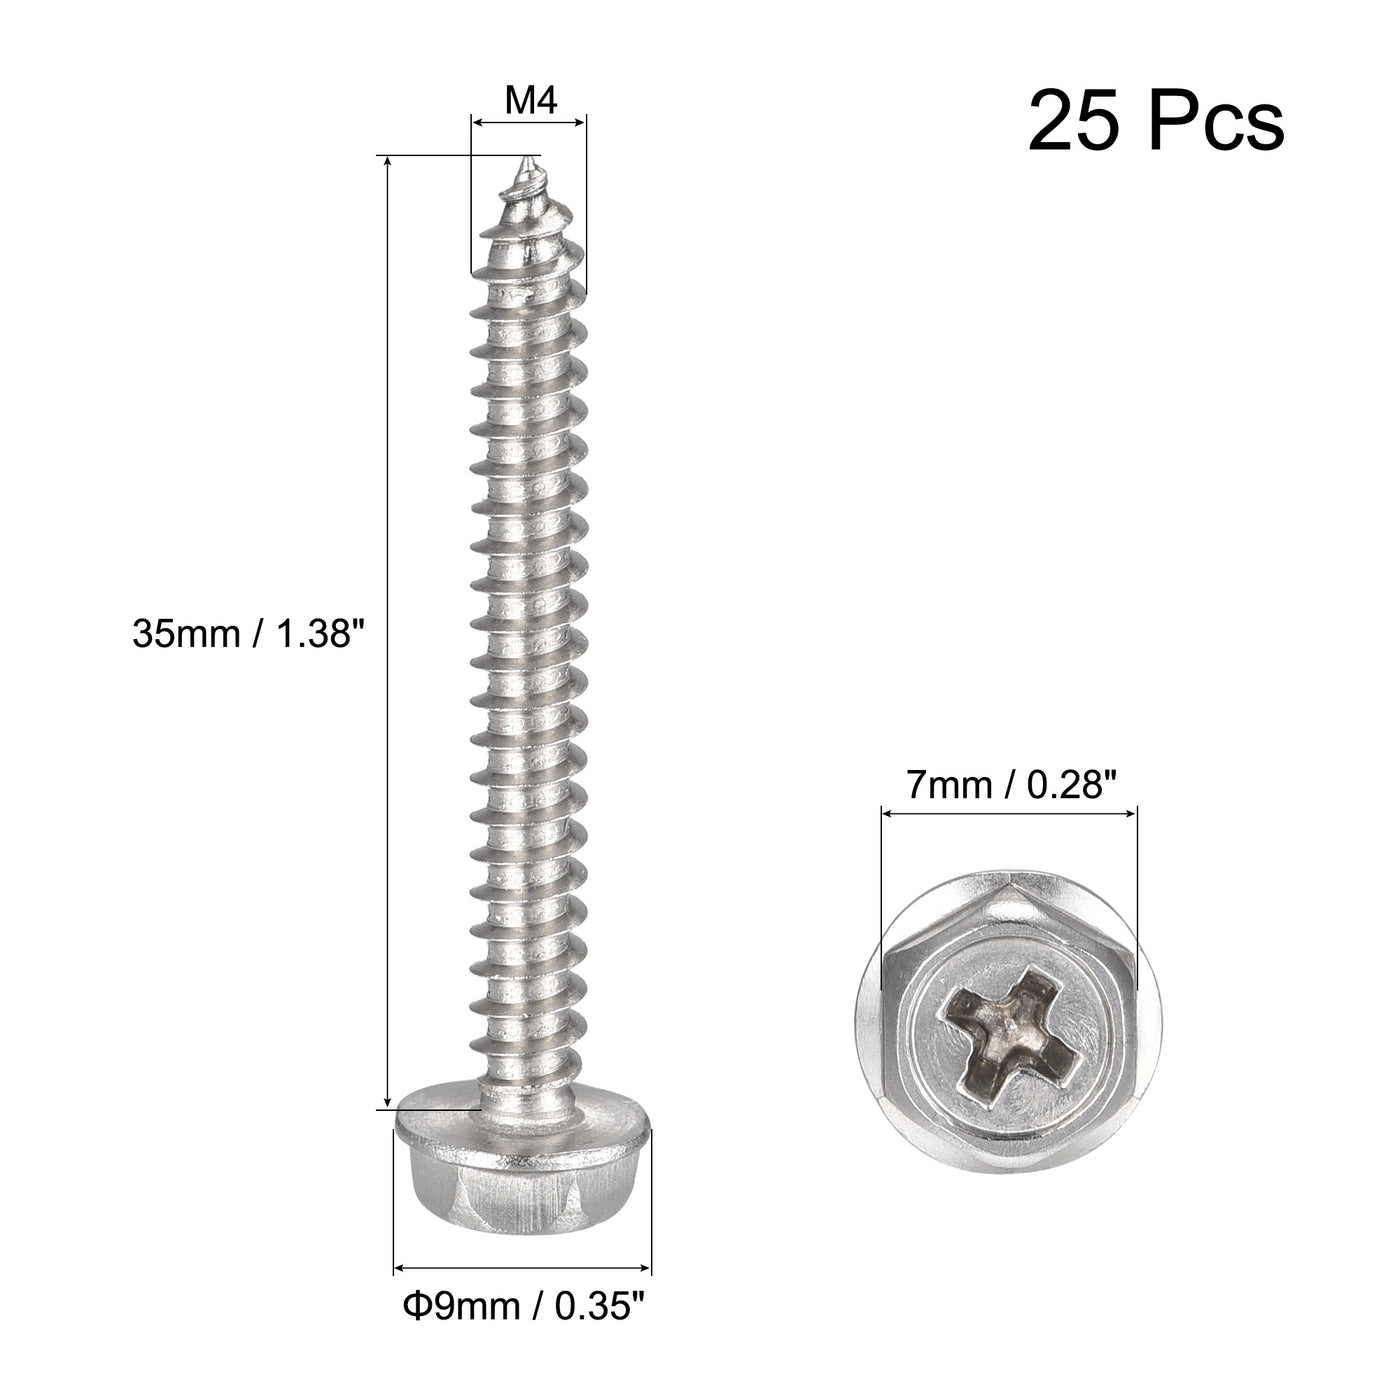 uxcell Uxcell Phillips Hex Washer Self Tapping Screws, M4 x 35mm 304 Stainless Steel Hex Flange Sheet Metal Screw 25pcs